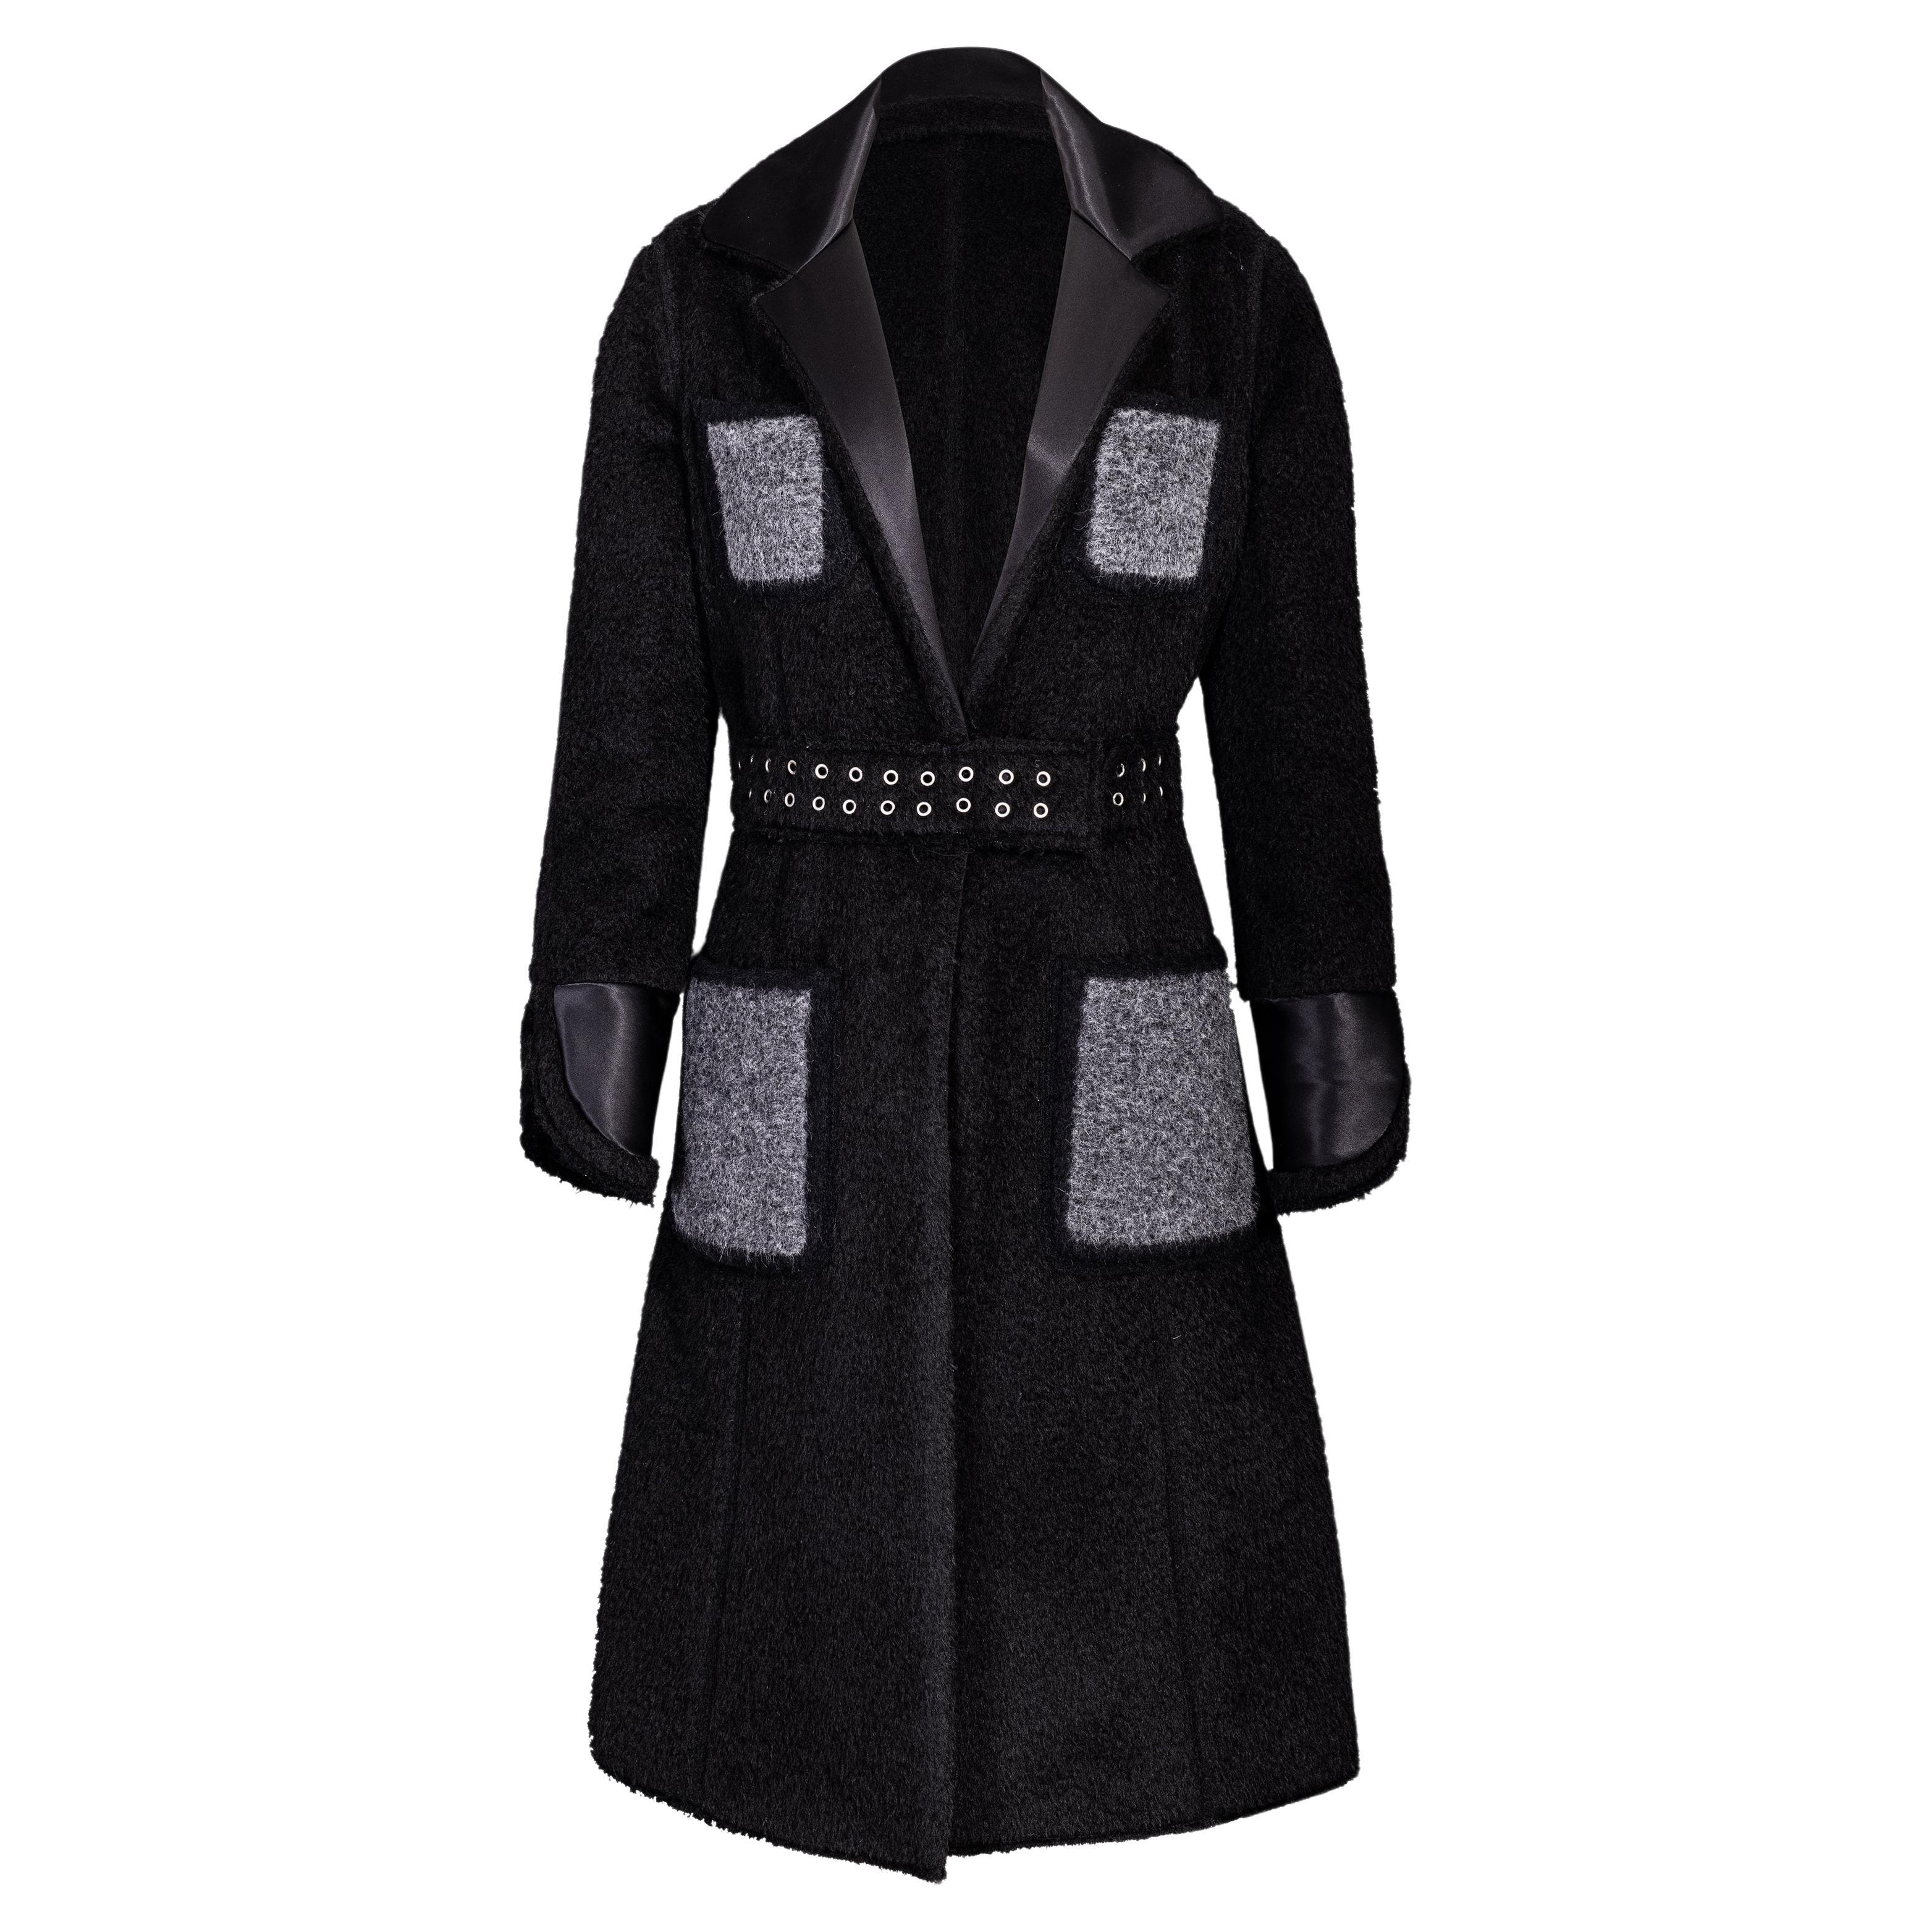 Pre-Fall 2014 Céline by Phoebe Philo Black Shearling Coat with Gray Accents